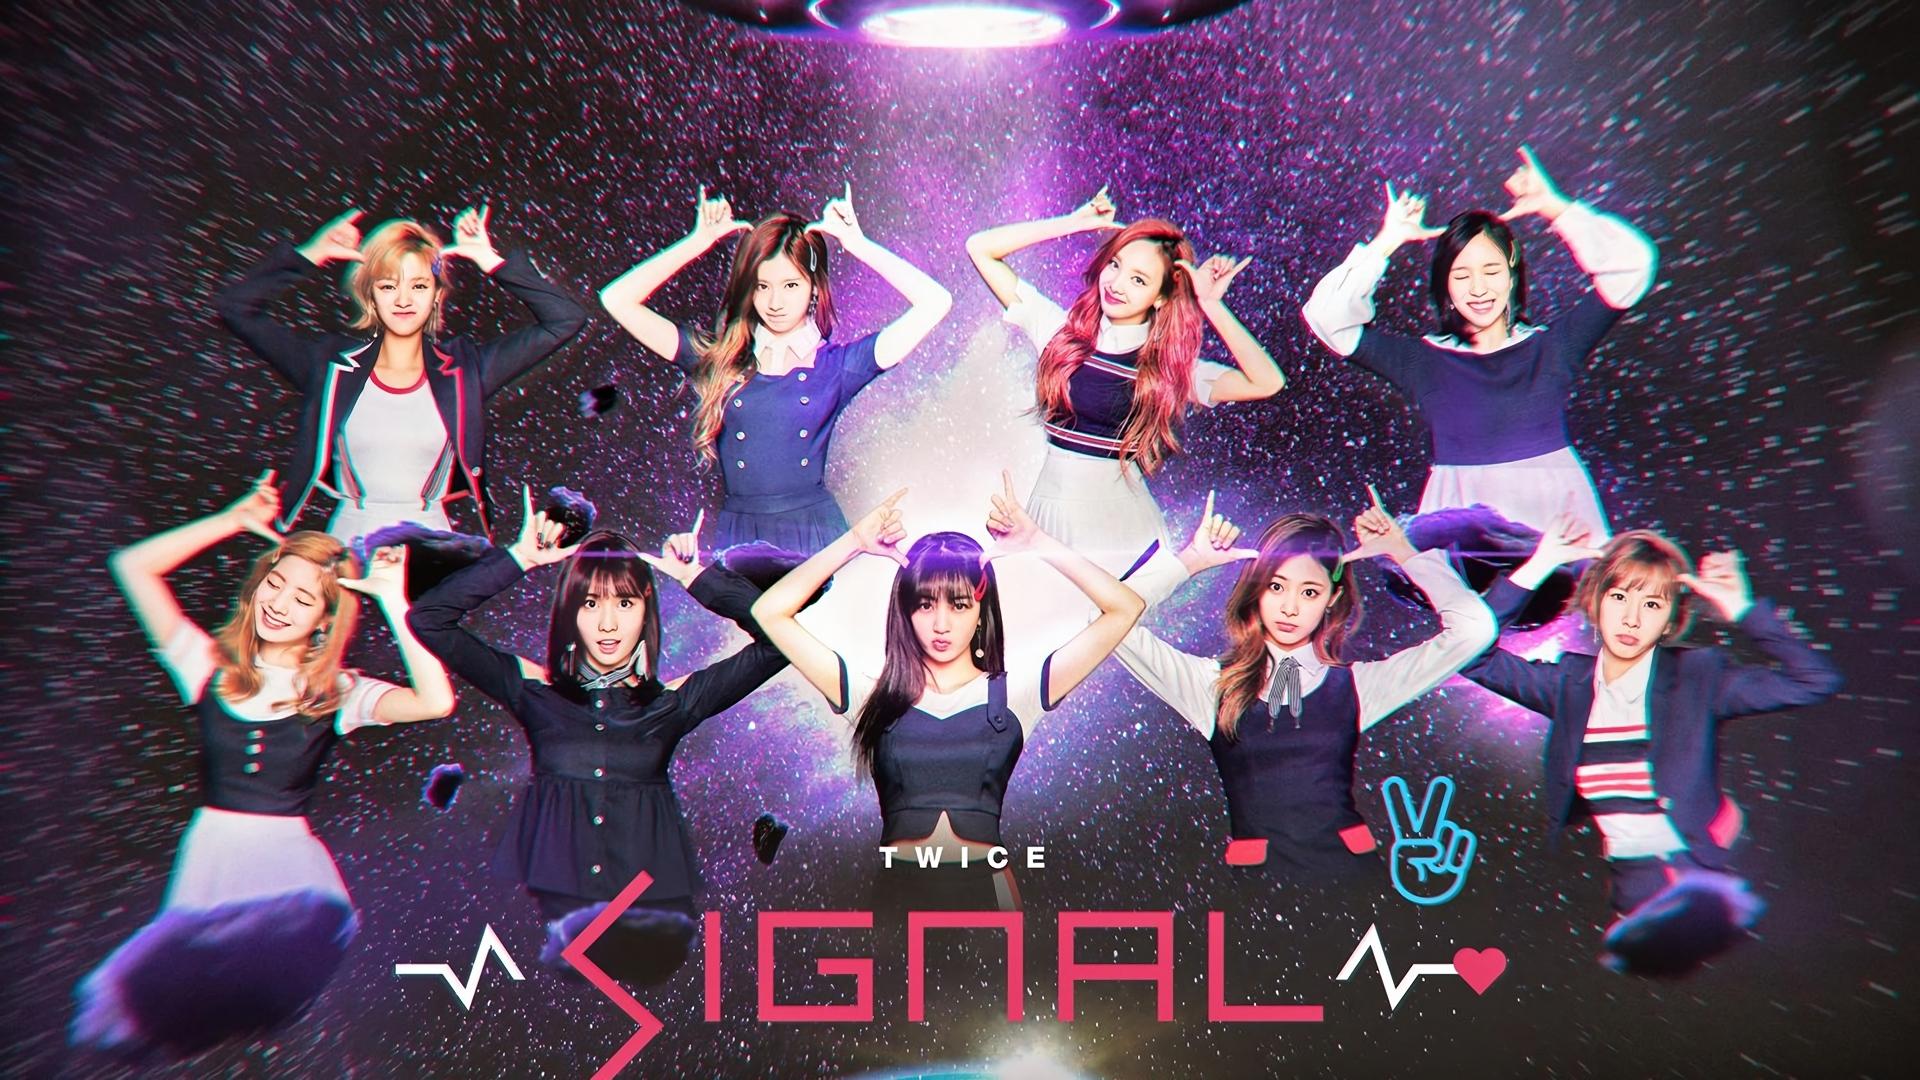 The Signal Wallpaper. The Signal